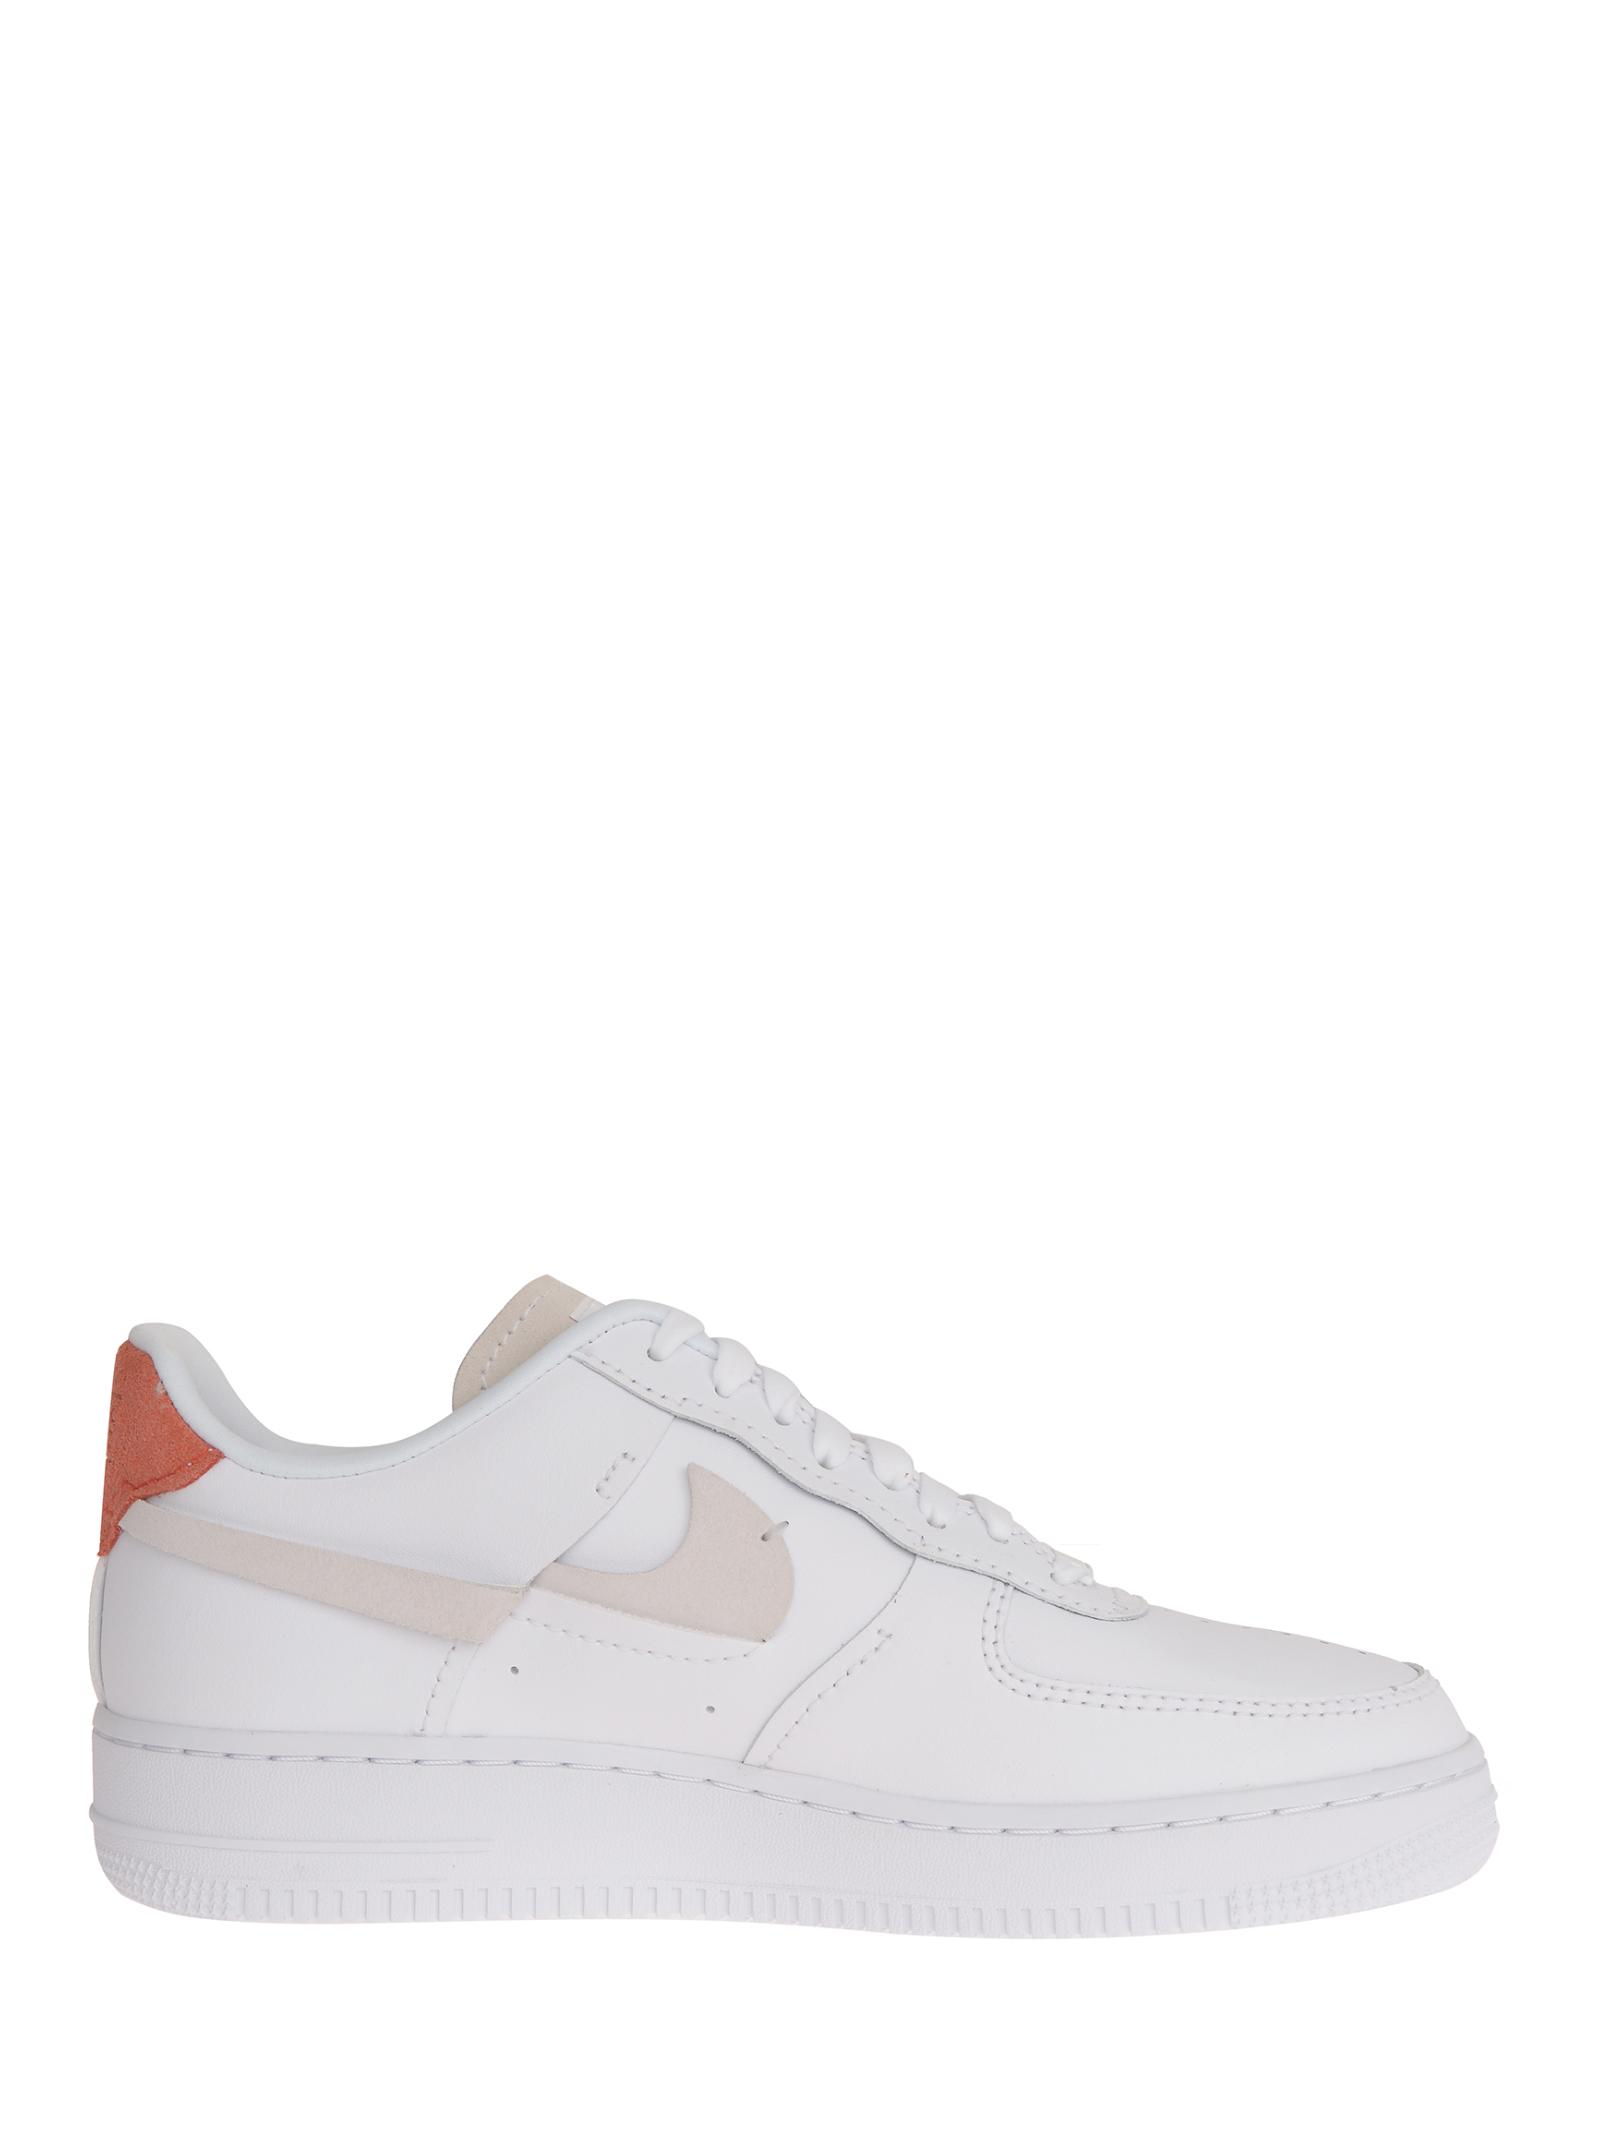 Nike Air Force 1 '07 reflective White Sneakers In White,beyond Pink,total  Orange,white